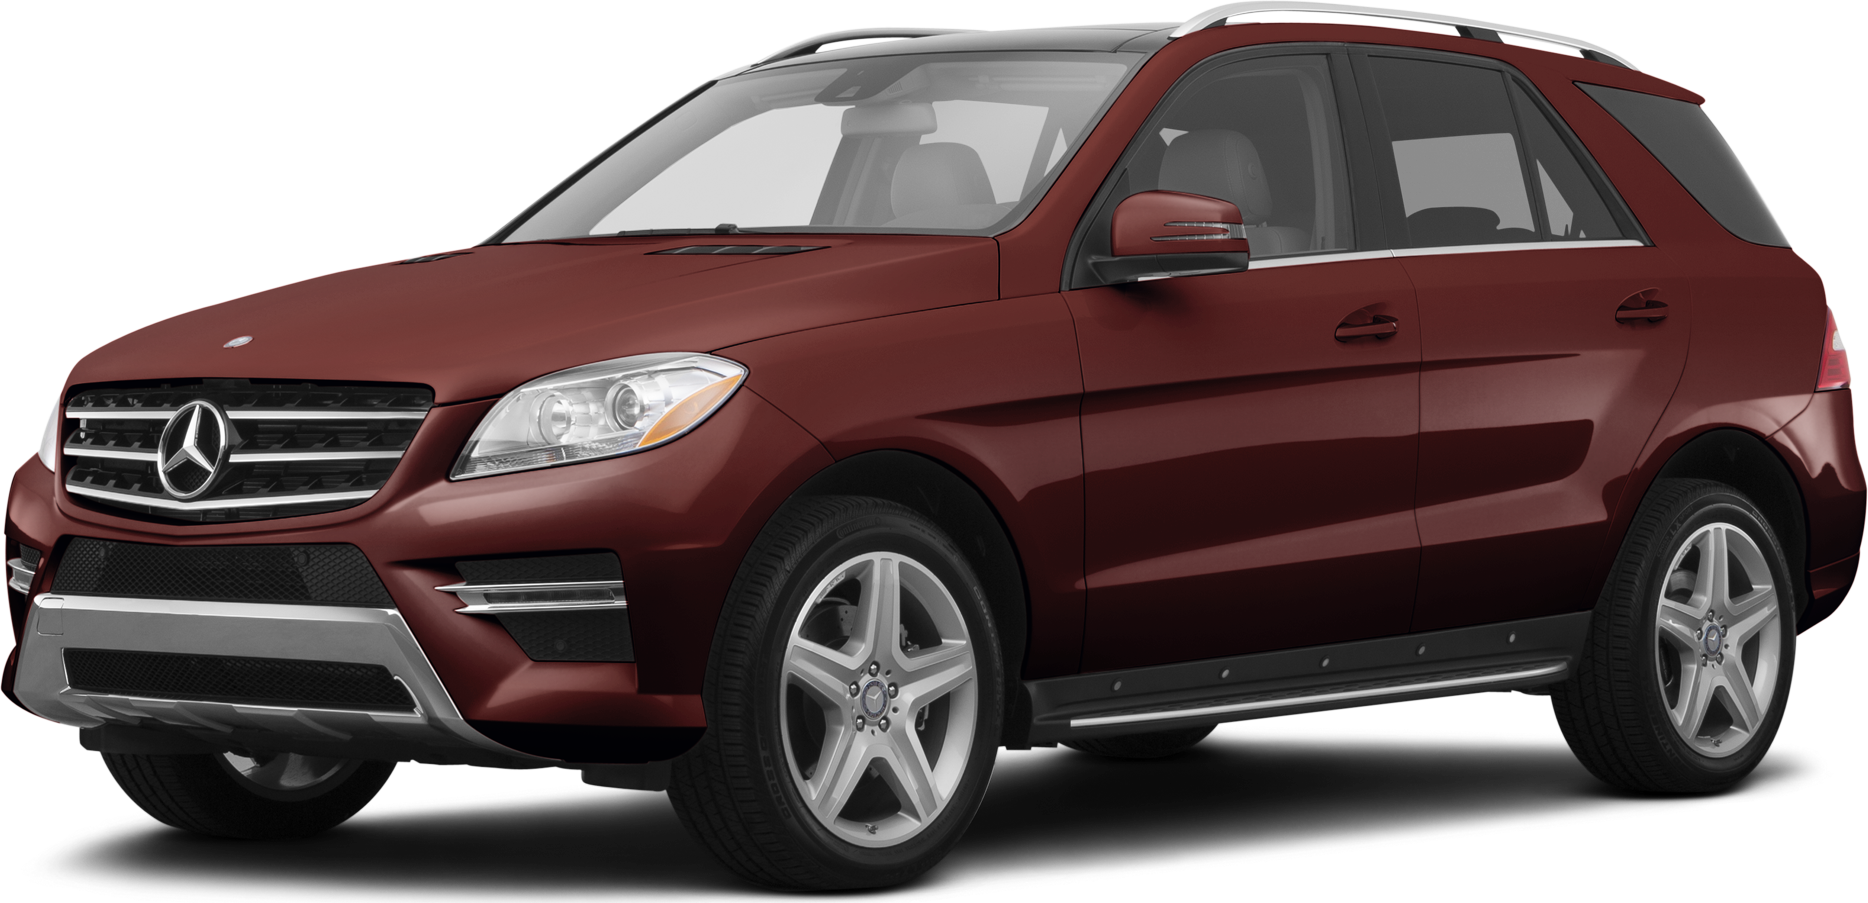 2016 Mercedes Benz Gle Pricing Reviews Ratings Kelley